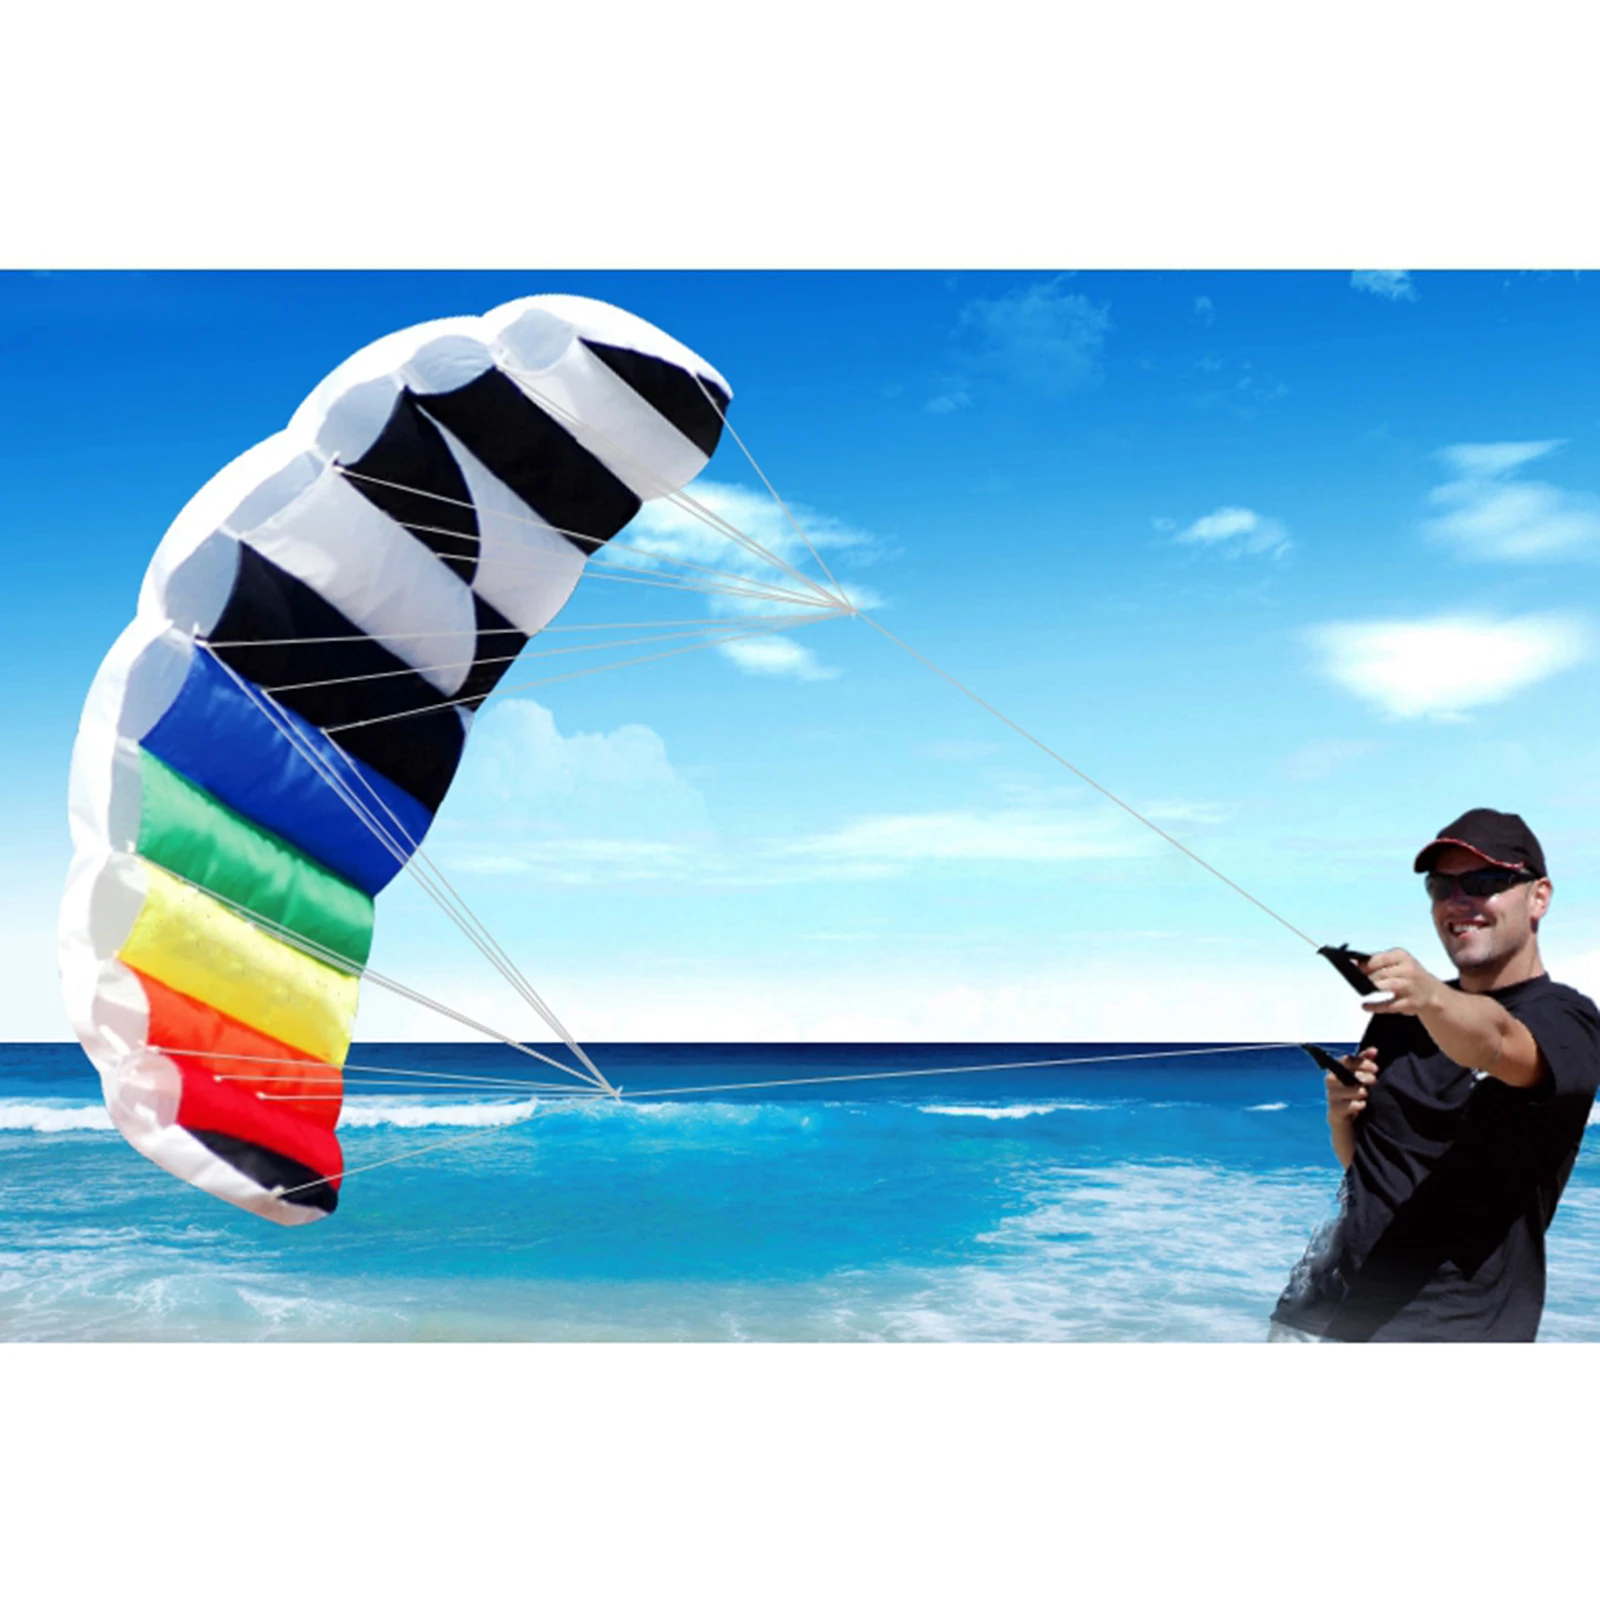 Dual Line Stunt Parafoil Kite Summer Beach Kite Surfing Surfboard Inflatable Kitesurfing Trainer Fly Kite Wing for Water Sport